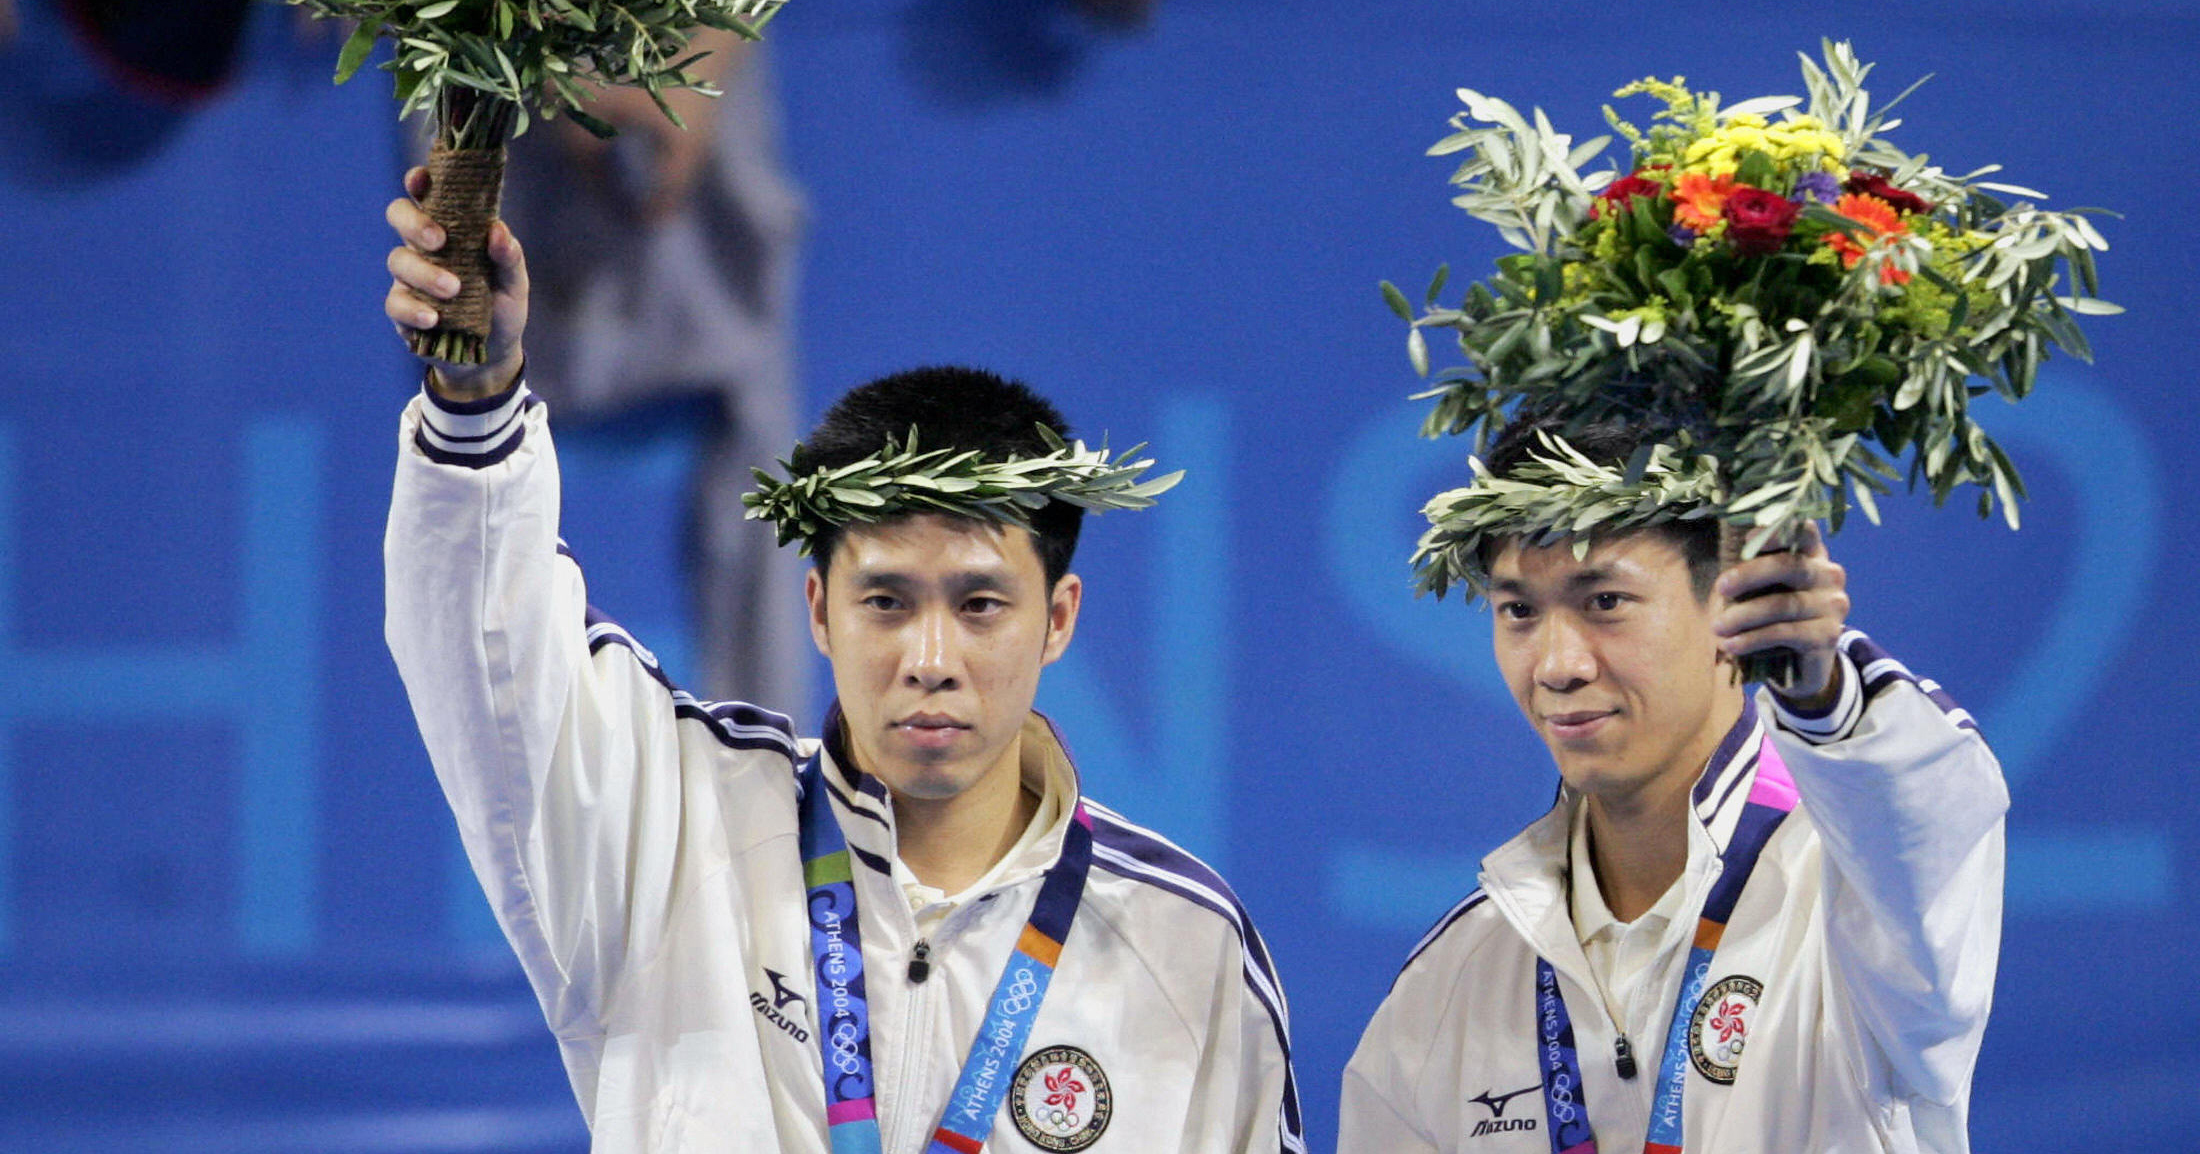 Athens, GREECE:  Hong Kong's Ko Lai Chak (L) and Li Ching wave on the podium after being awarded the silver medal in the men's doubles table tennis final at the Olympic Games in Athens, 21 August 2004.  China's Ma Lin and Chen Qi beat Ko Lai Chak and Li Ching 11-6, 11-9, 7-11, 11-8, 8-11, 11-5 to take gold.  AFP PHOTO / RAMZI HAIDAR  (Photo credit should read RAMZI HAIDAR/AFP/Getty Images)